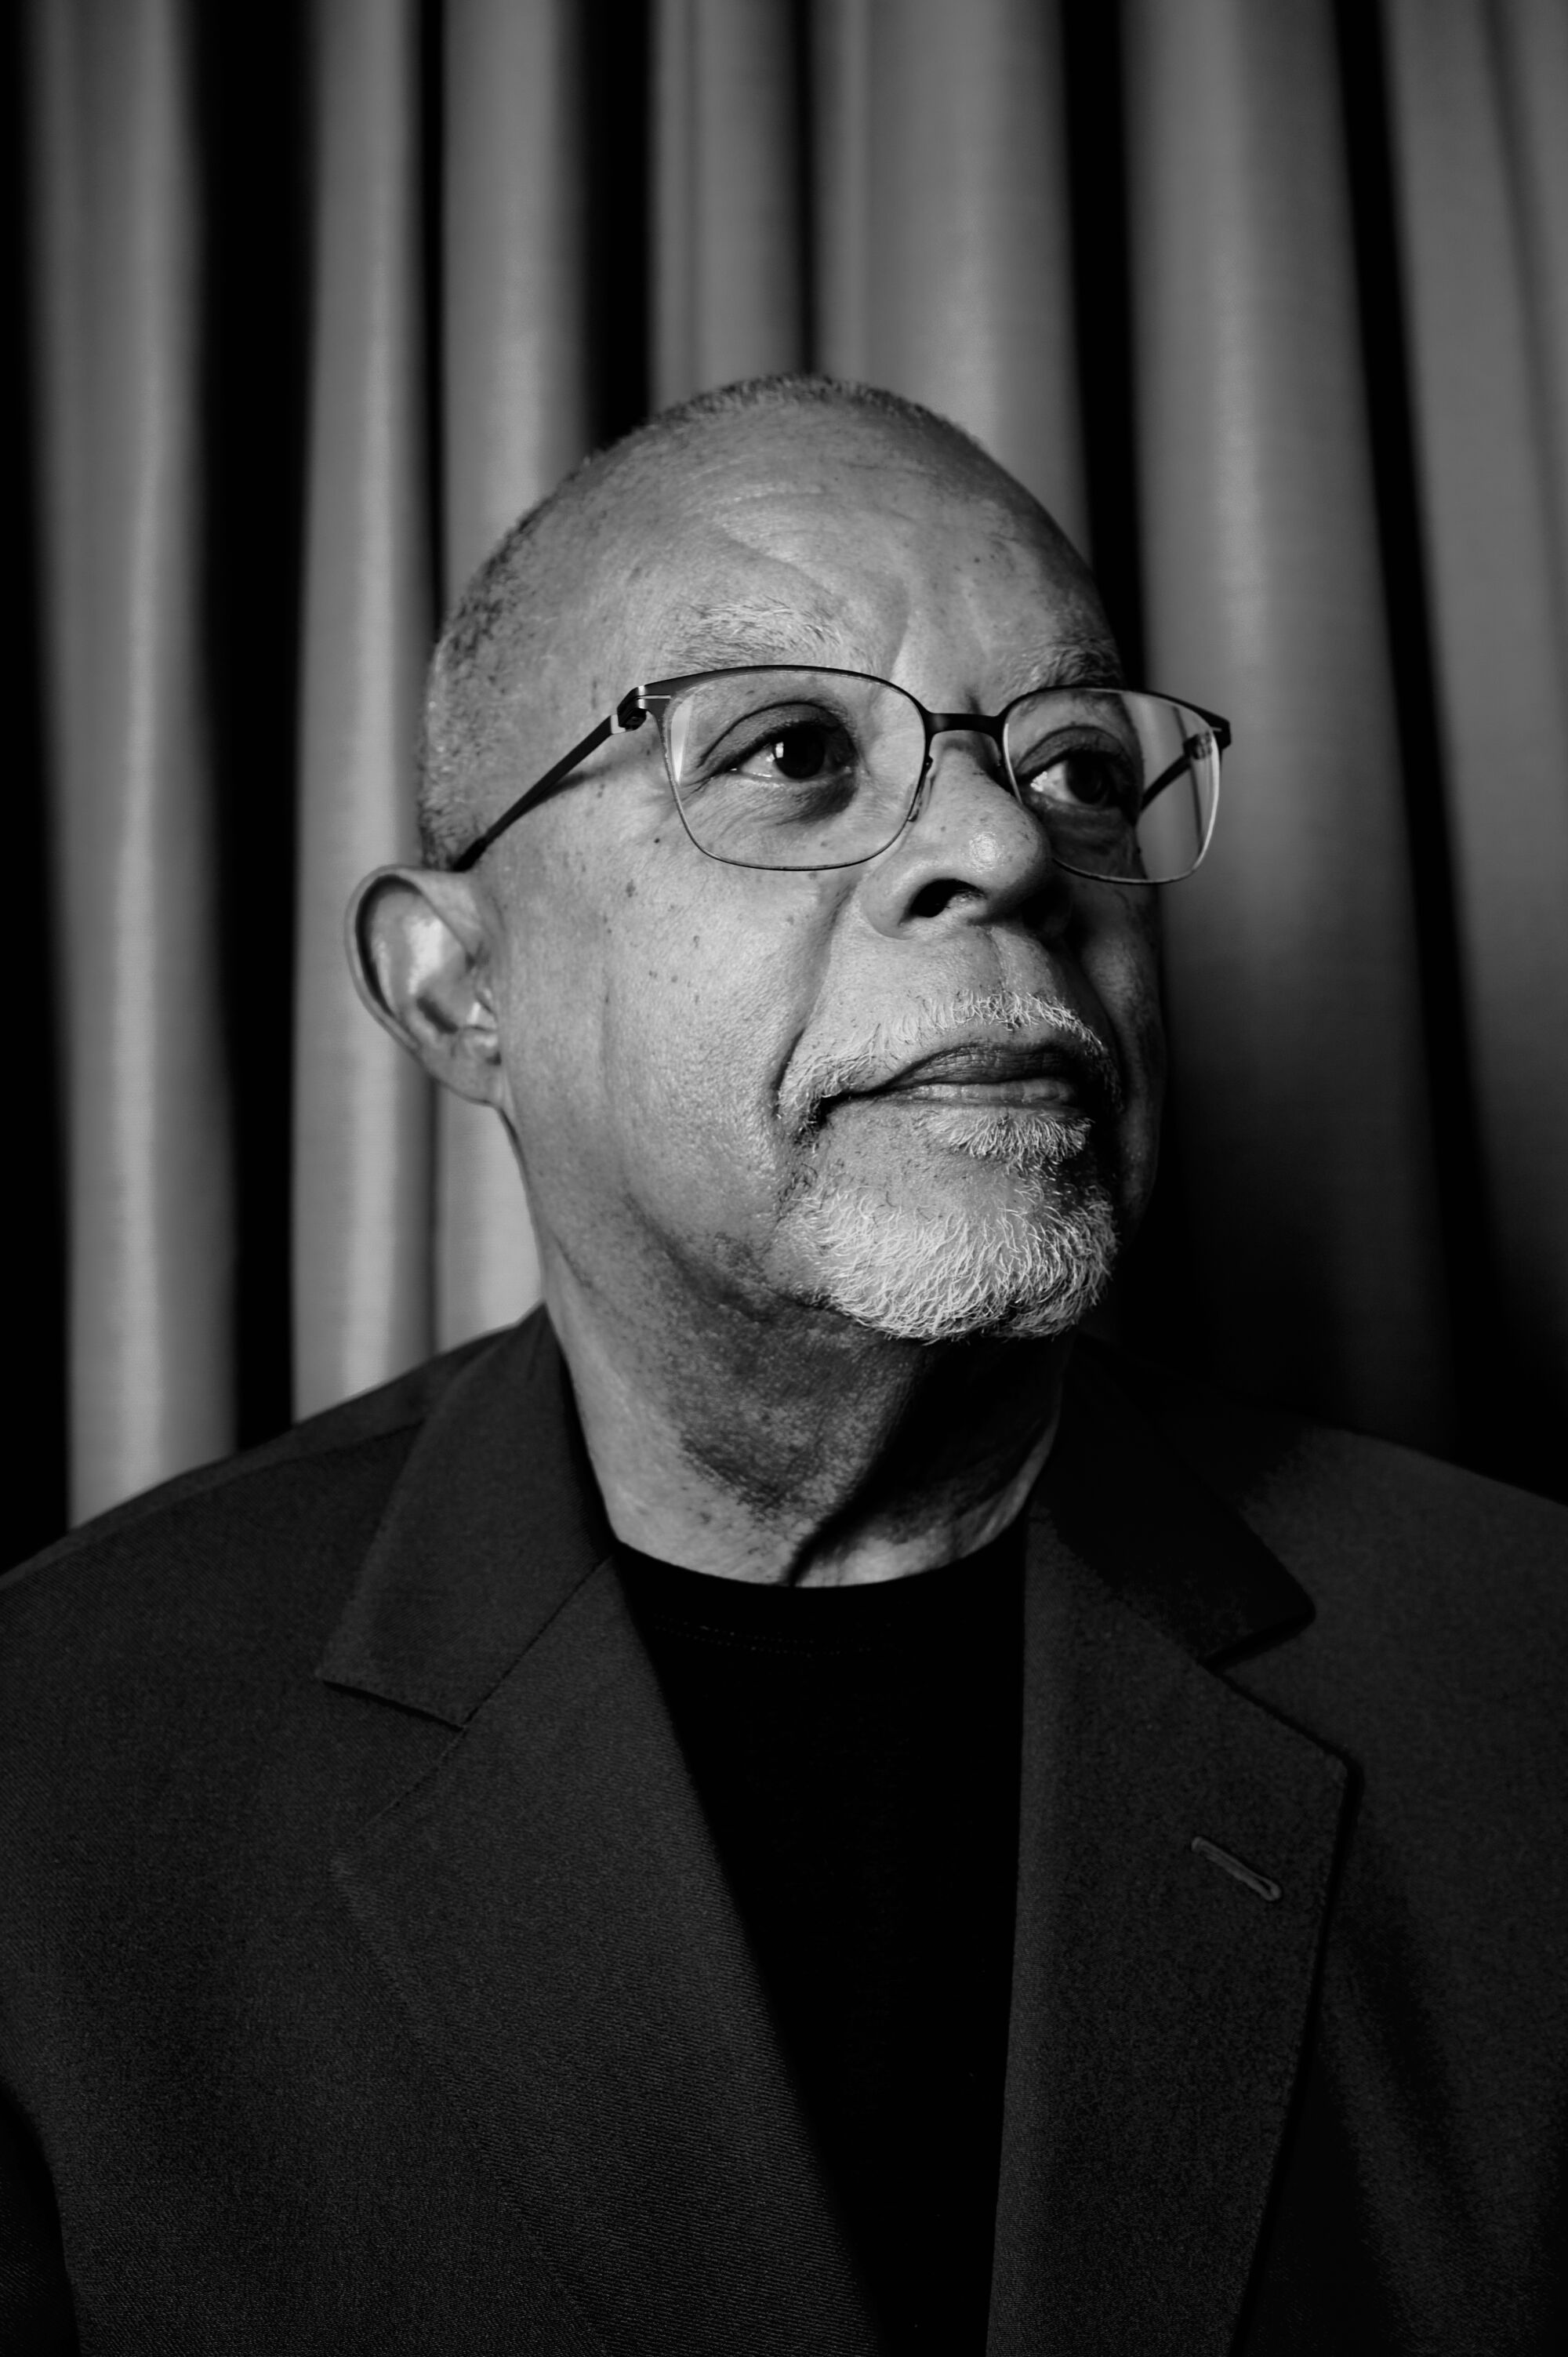 A black and white photo portrait of a man with a shaved head, glasses and a goatee.